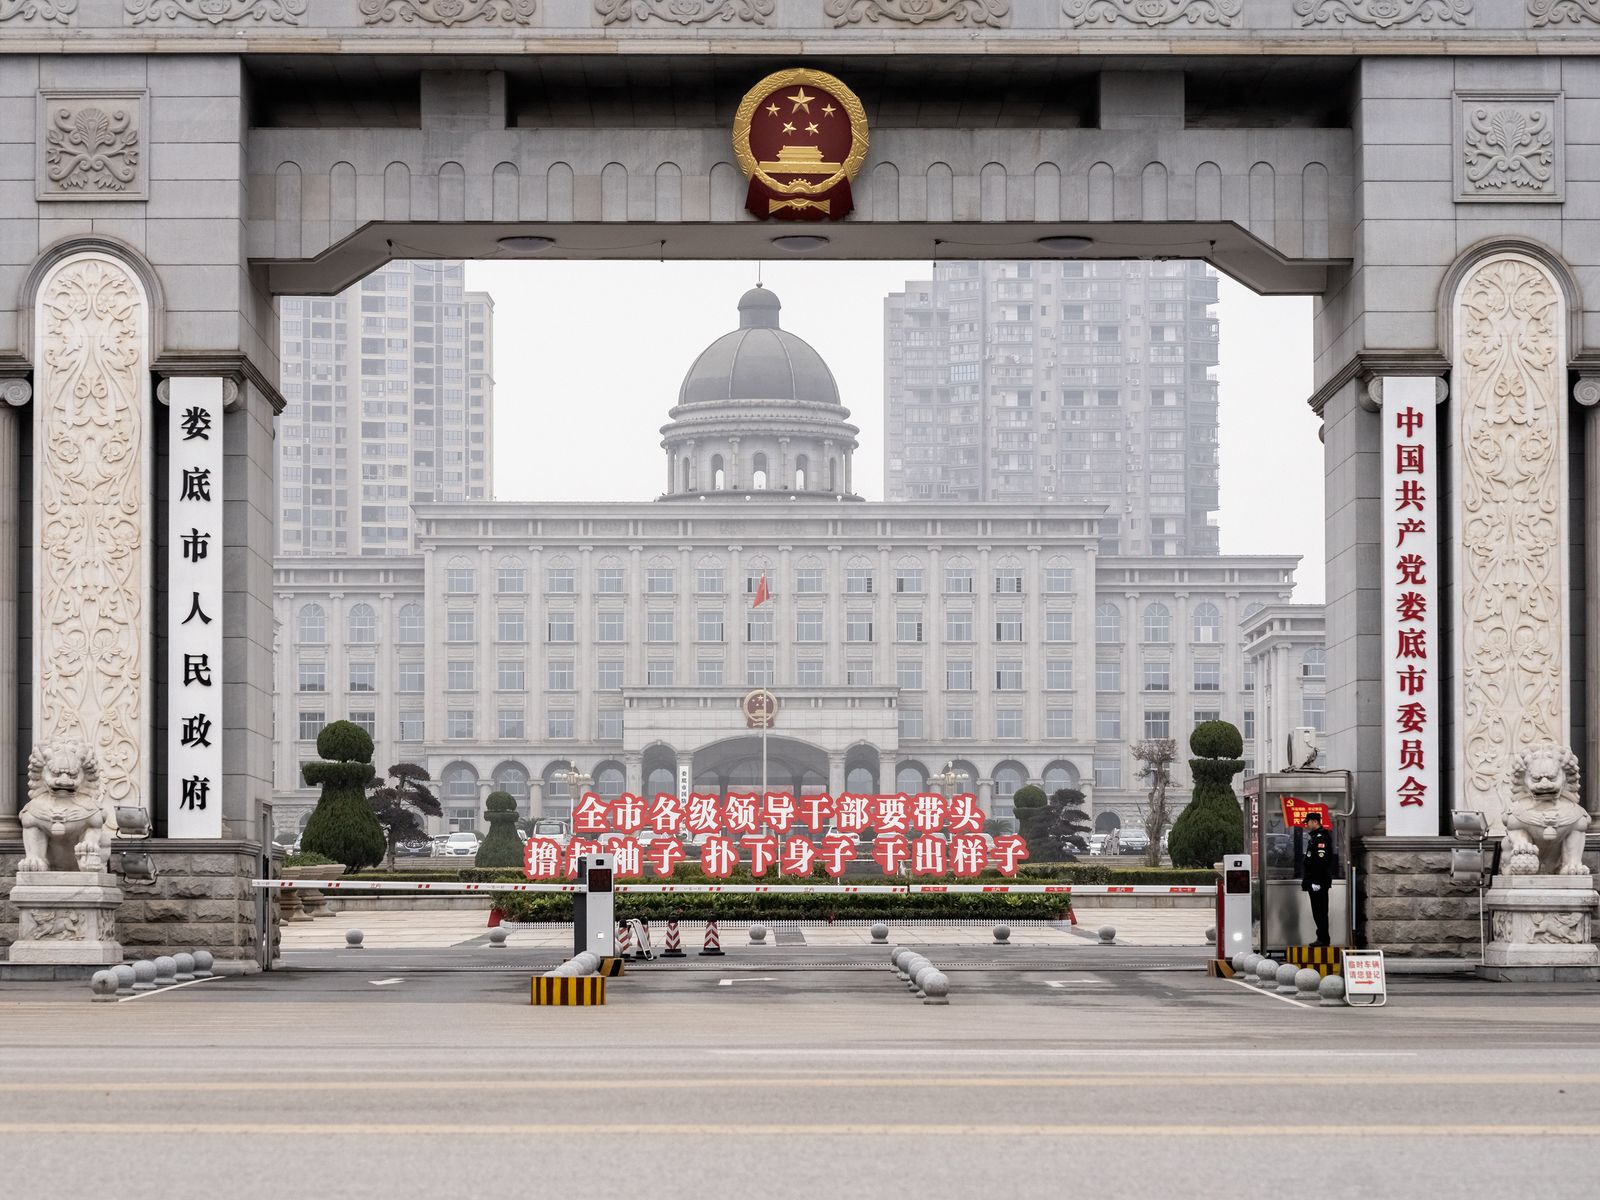 © WU GUOYONG - Image from the China's "White House" photography project